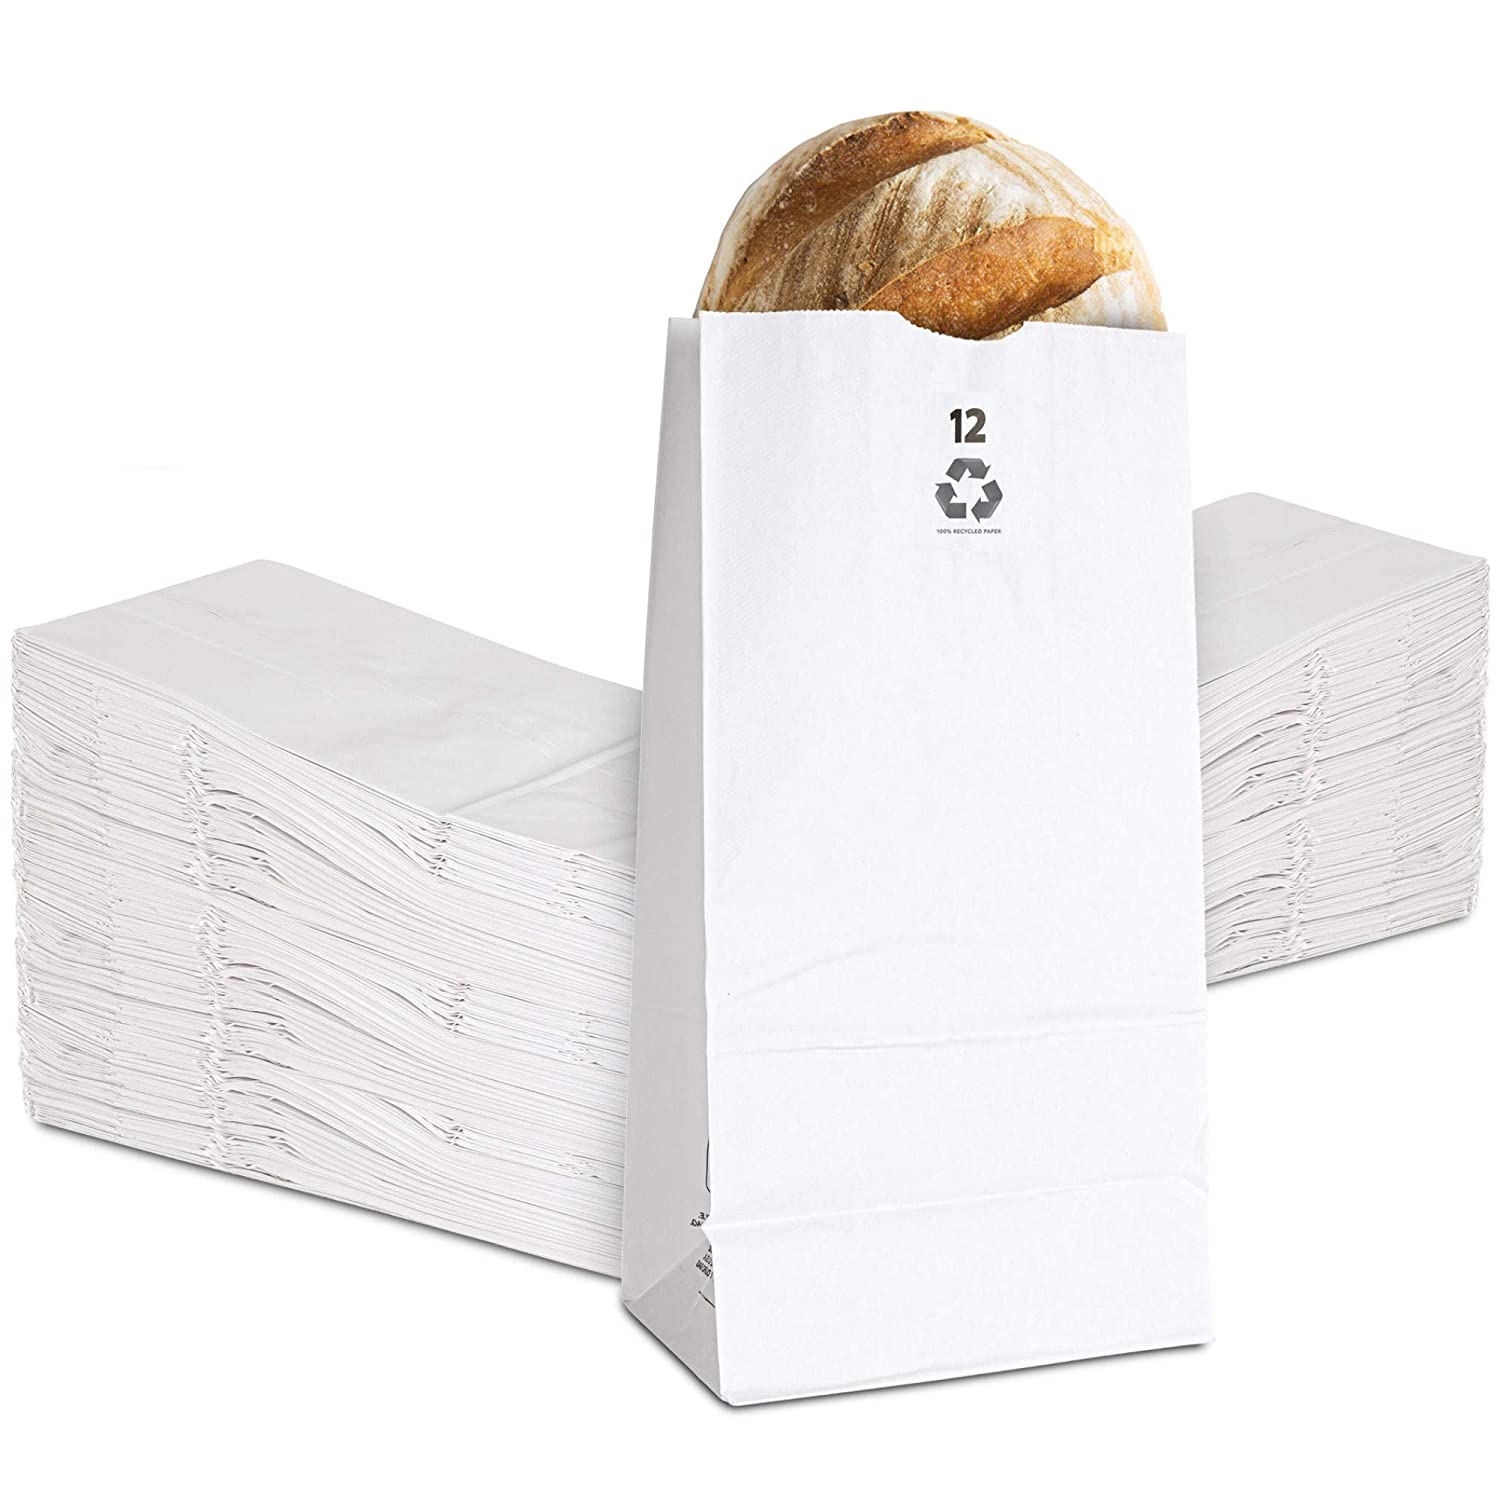 Stock Your Home 12 Lb White Paper Bags (100 Count) - Eco Friendly Whit